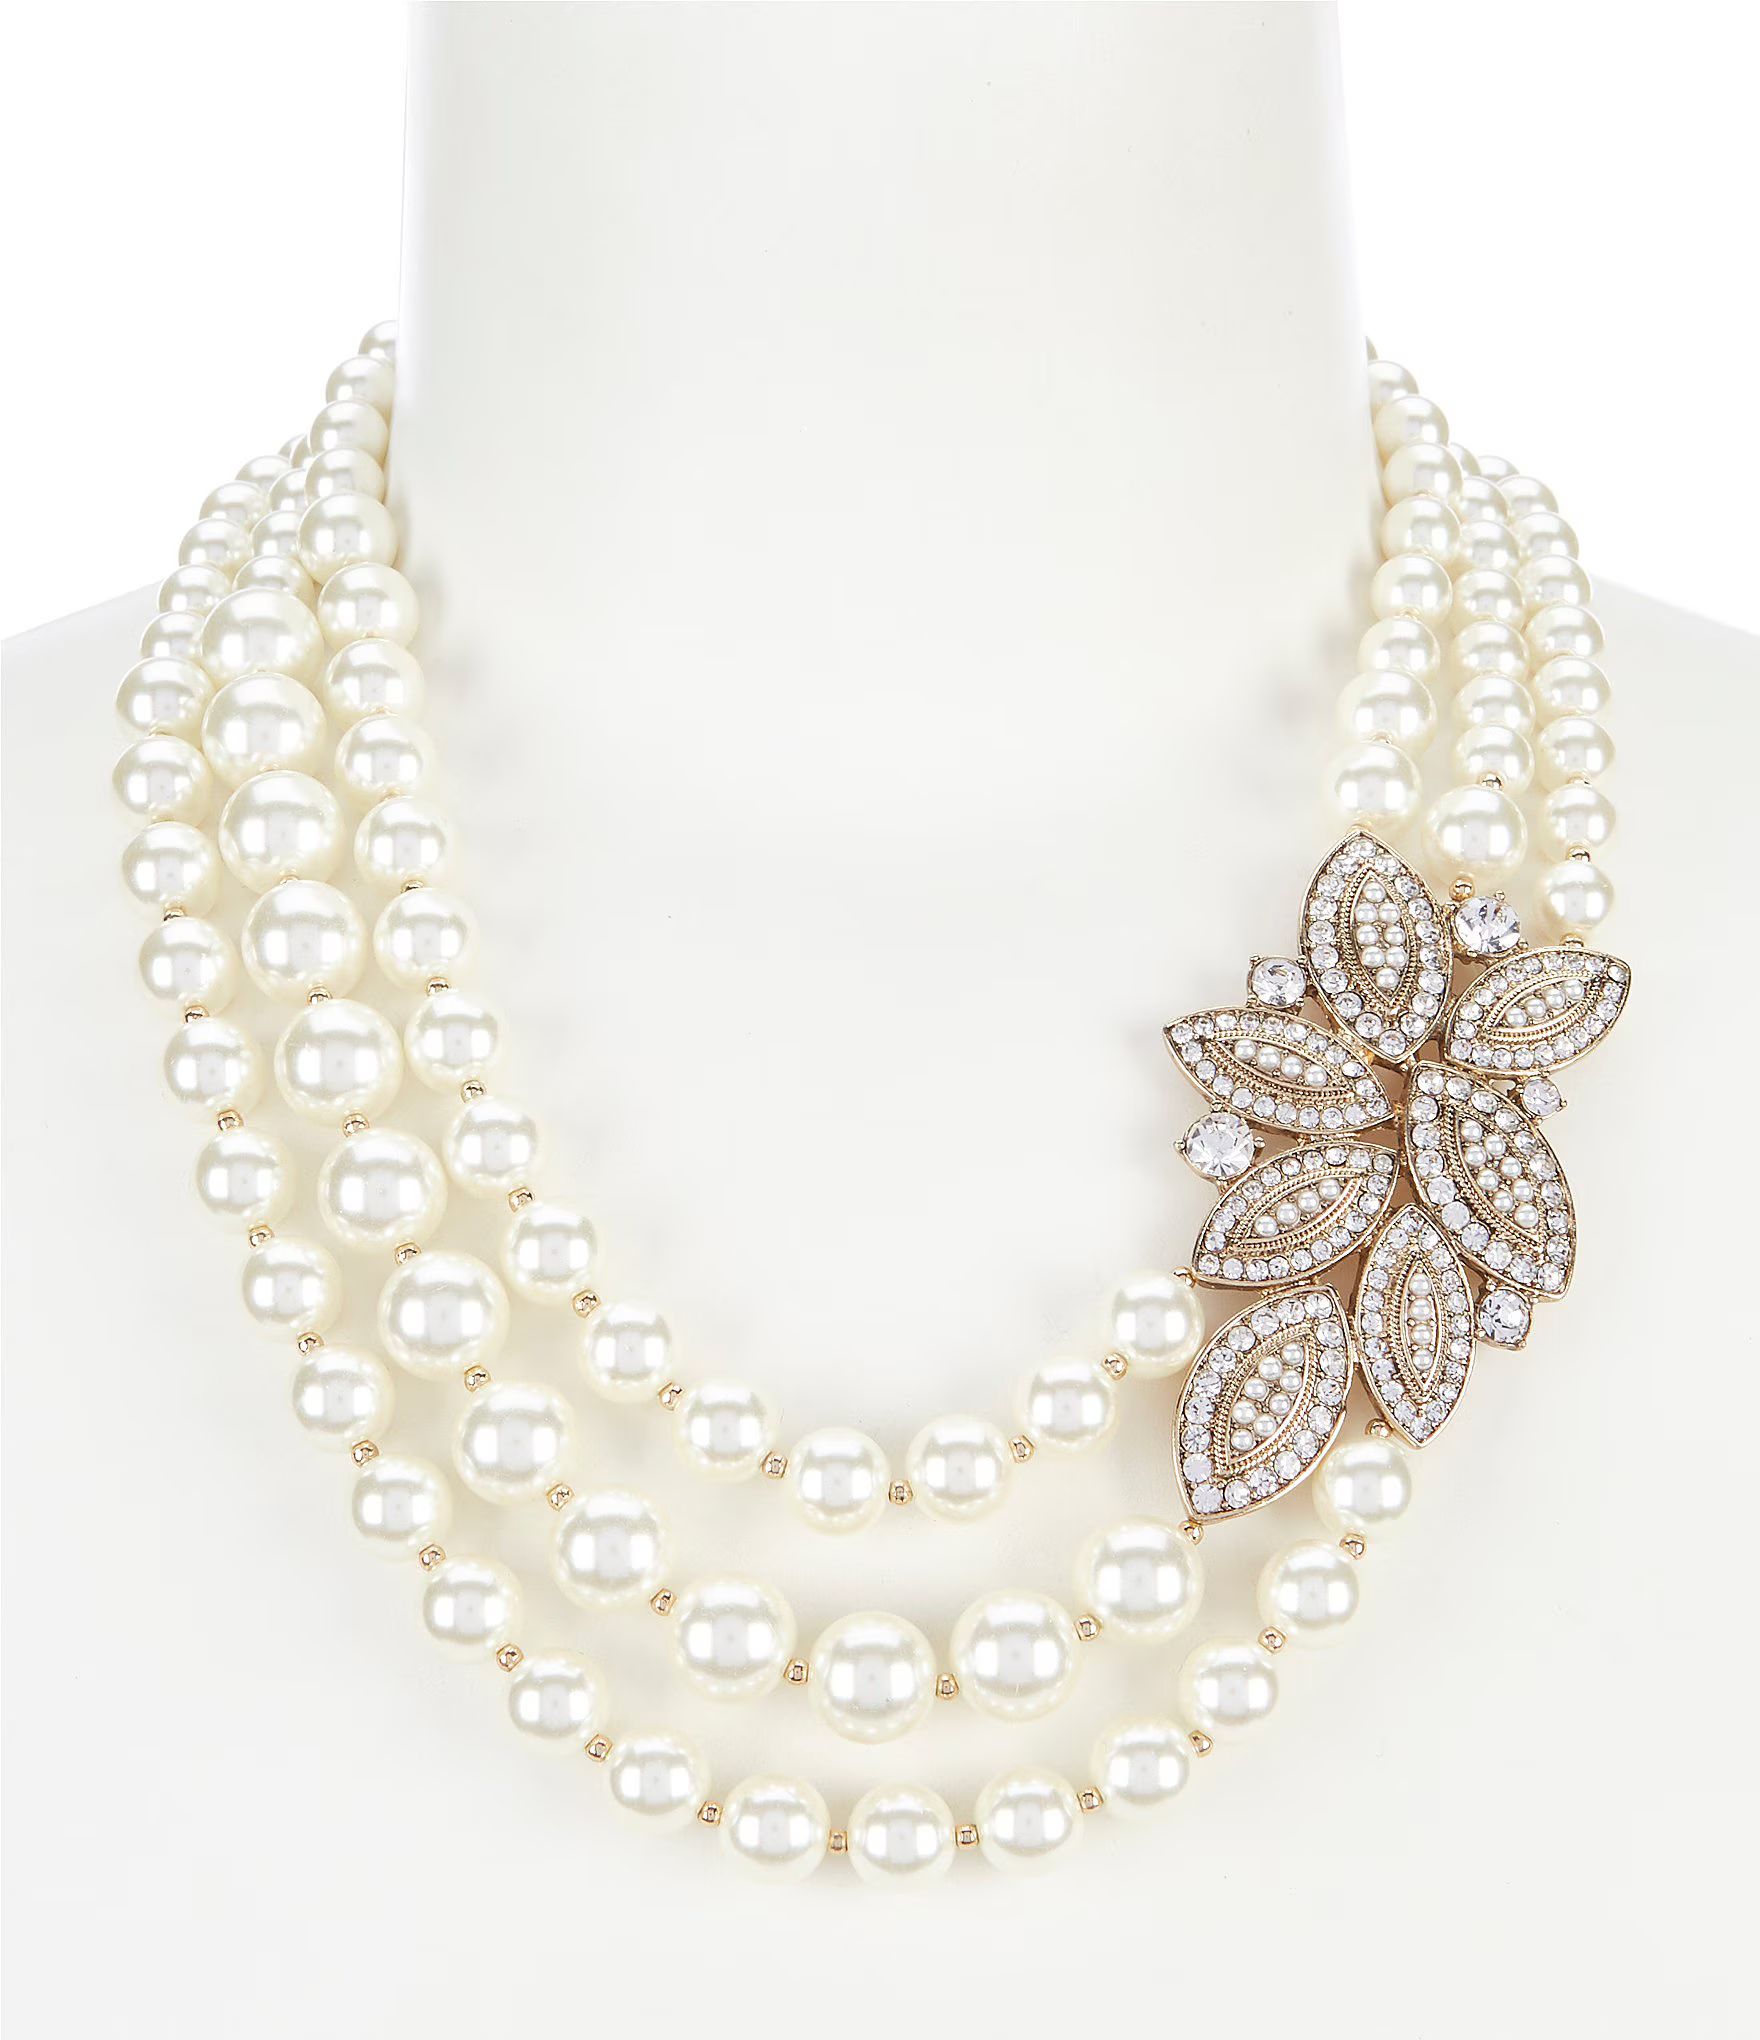 Blanc Crystal and Pearl Statement Necklace | Dillard's